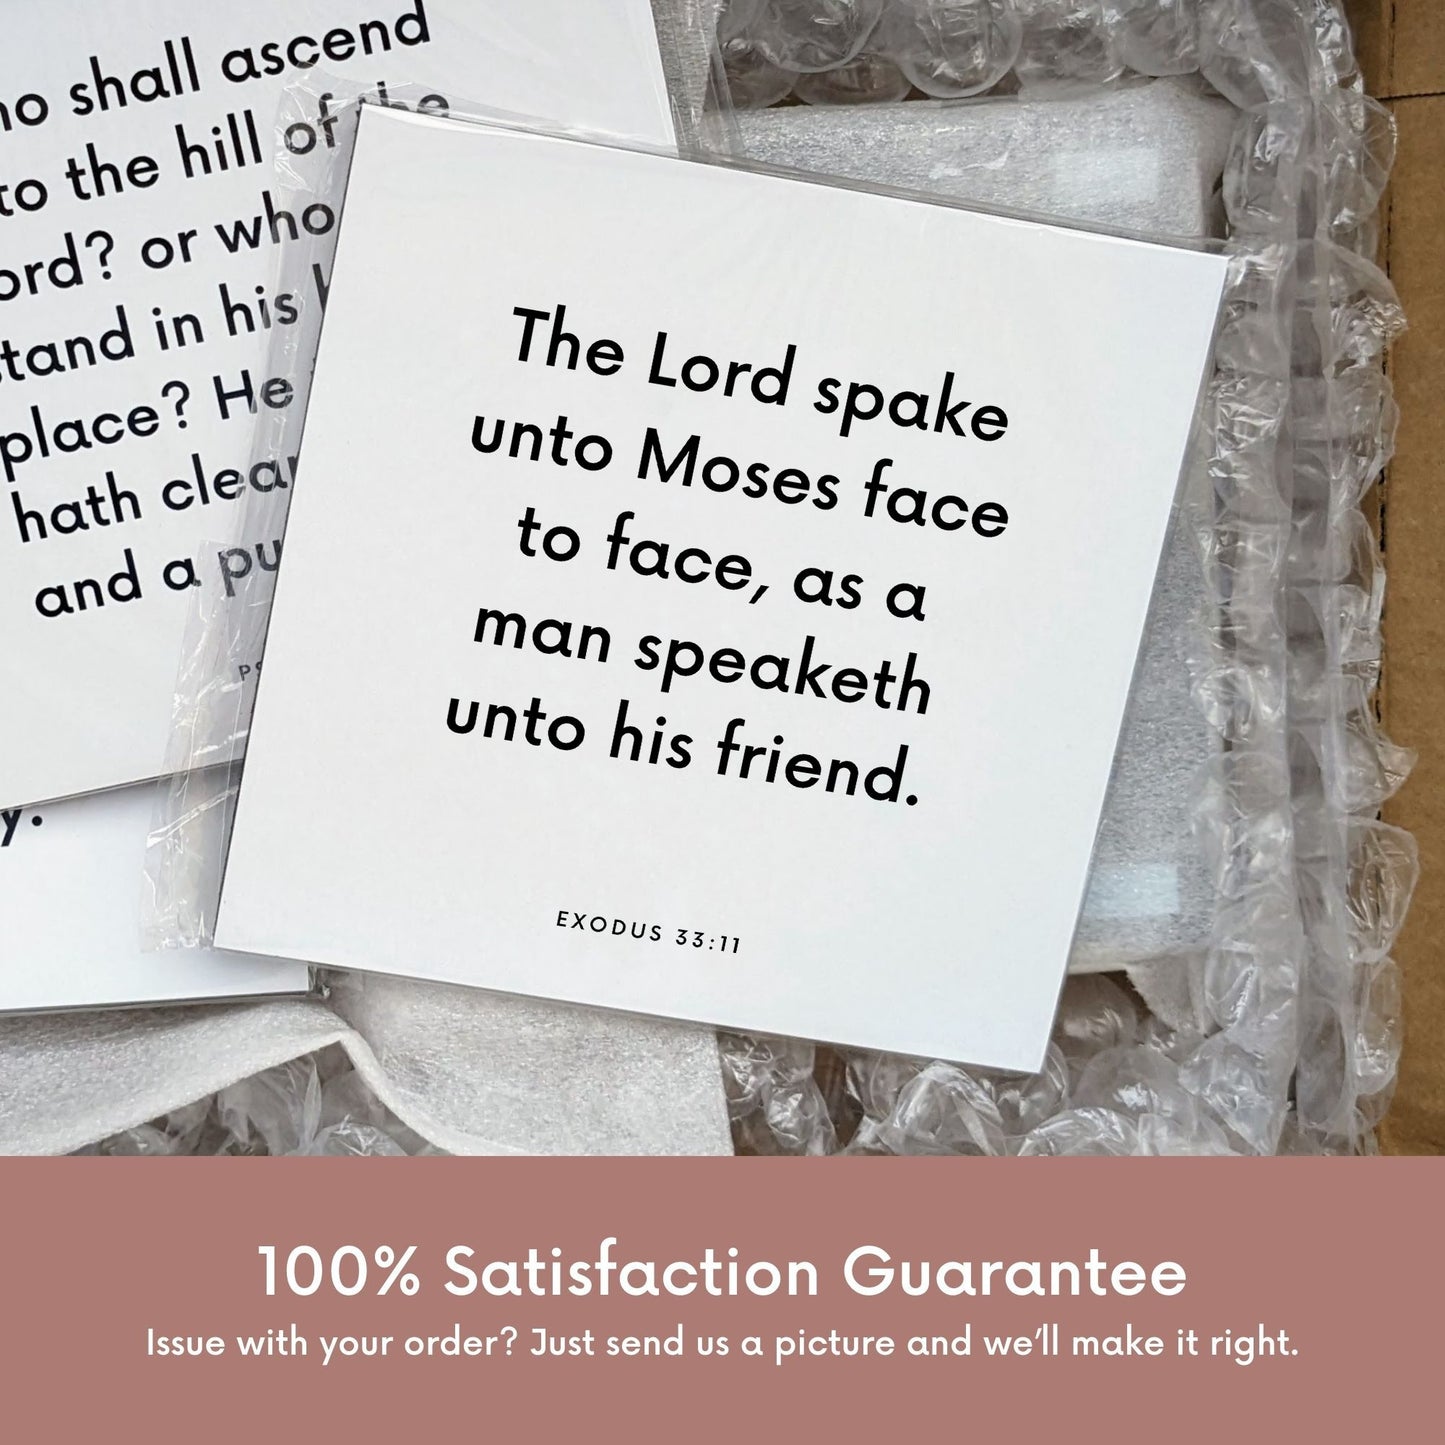 Shipping materials for scripture tile of Exodus 33:11 - "The Lord spake unto Moses face to face"